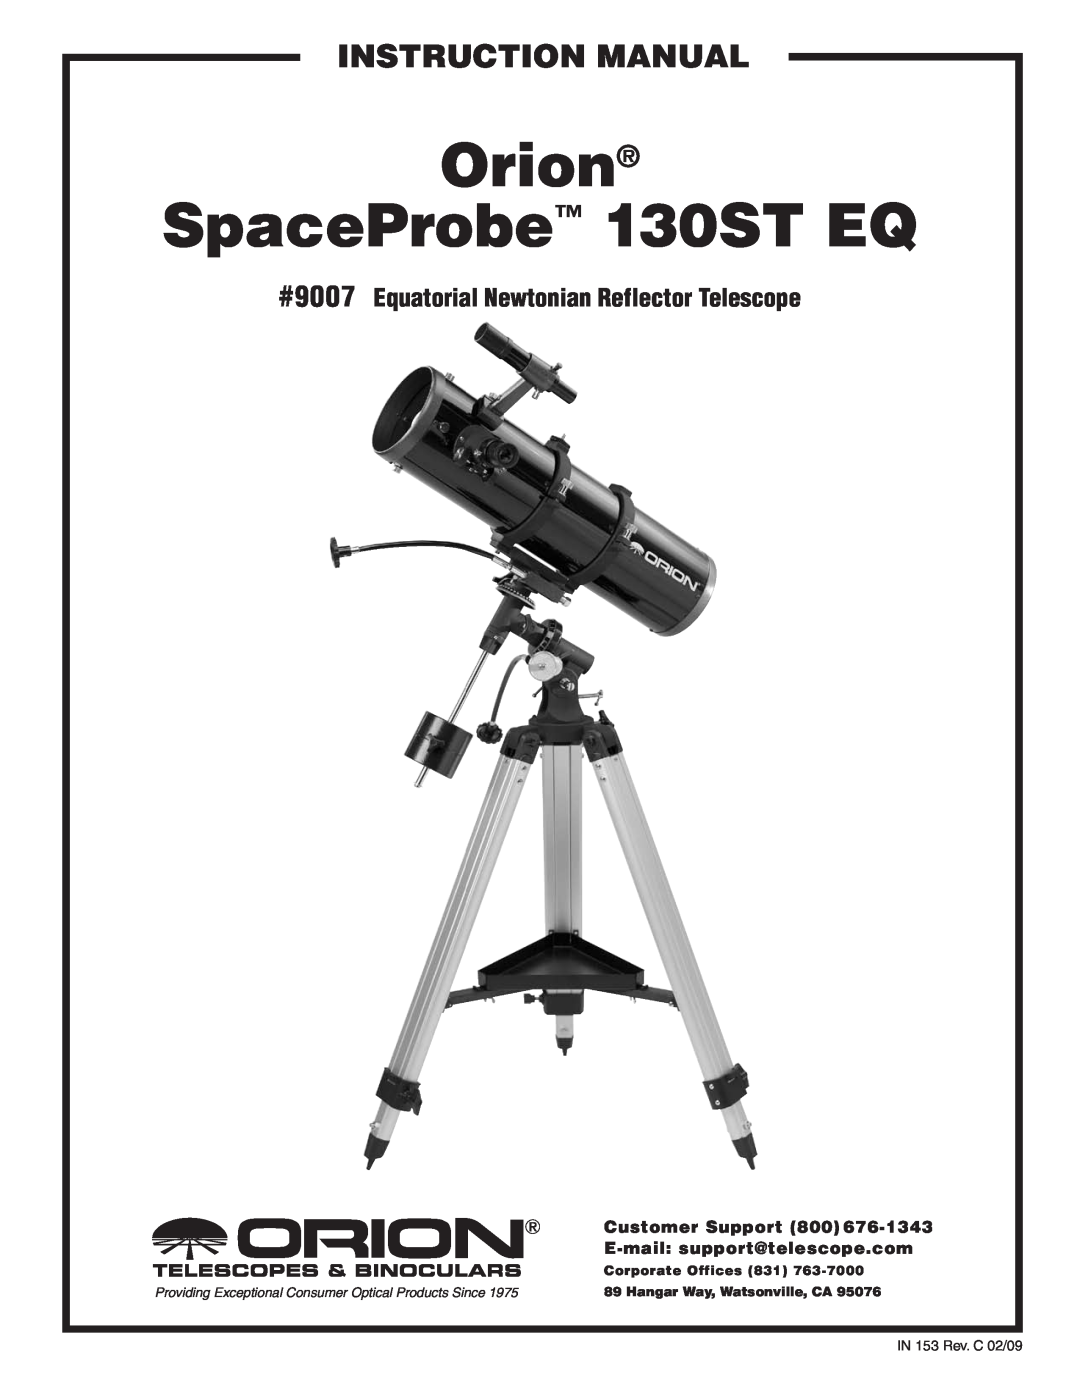 Orion 130ST EQ instruction manual Orion, SpaceProbe, #9007 Equatorial Newtonian Reflector Telescope, Customer Support 